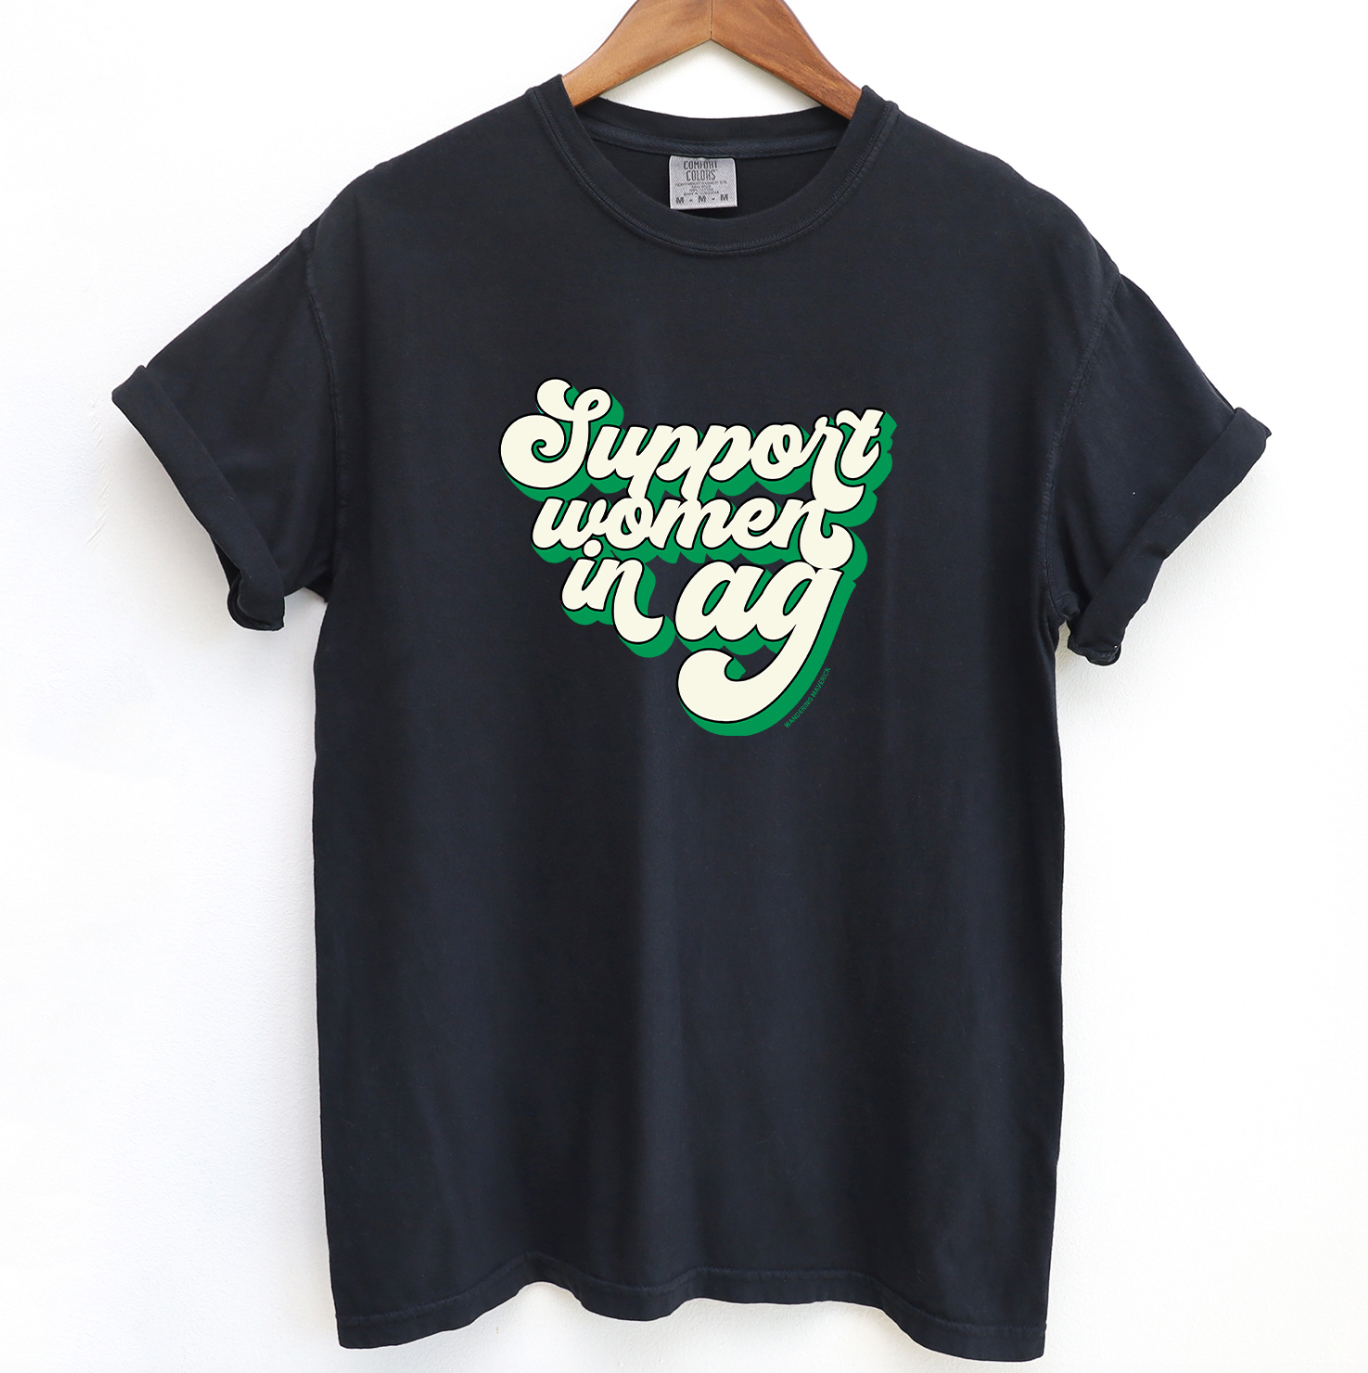 Retro Support Women In Ag Green ComfortWash/ComfortColor T-Shirt (S-4XL) - Multiple Colors!